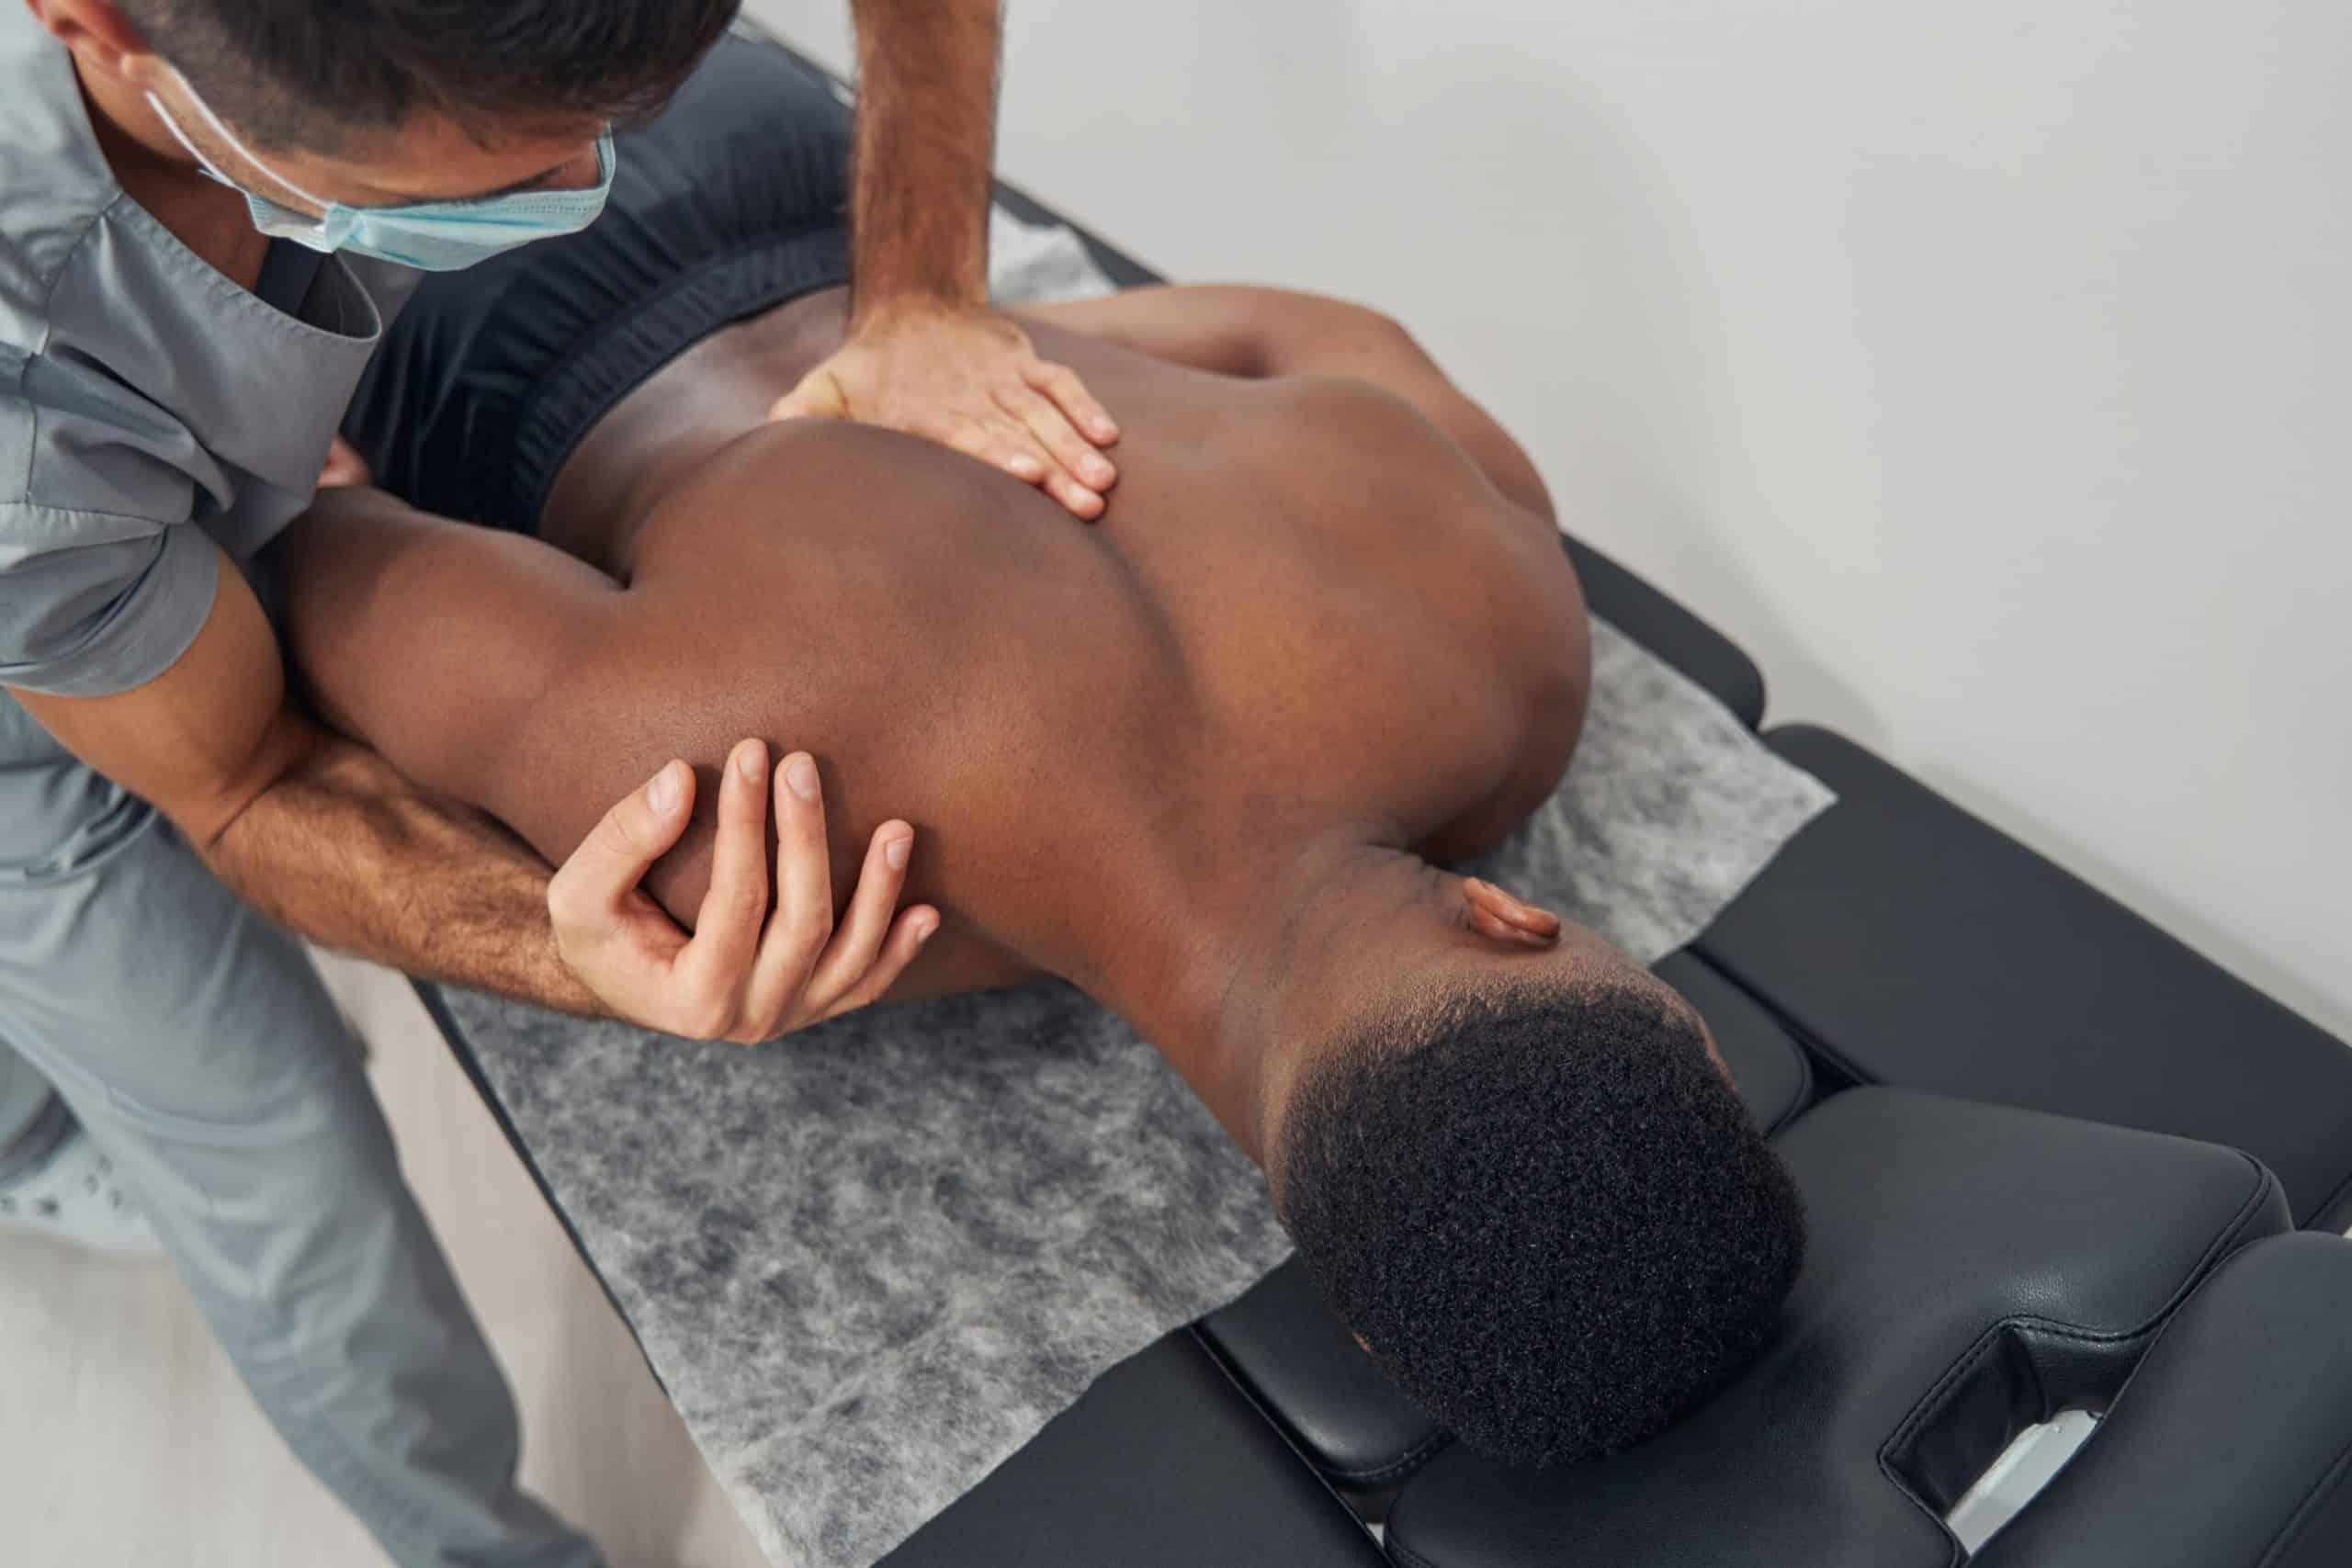 A man lying facedown on a table while a chiropractor does a spinal adjustment.